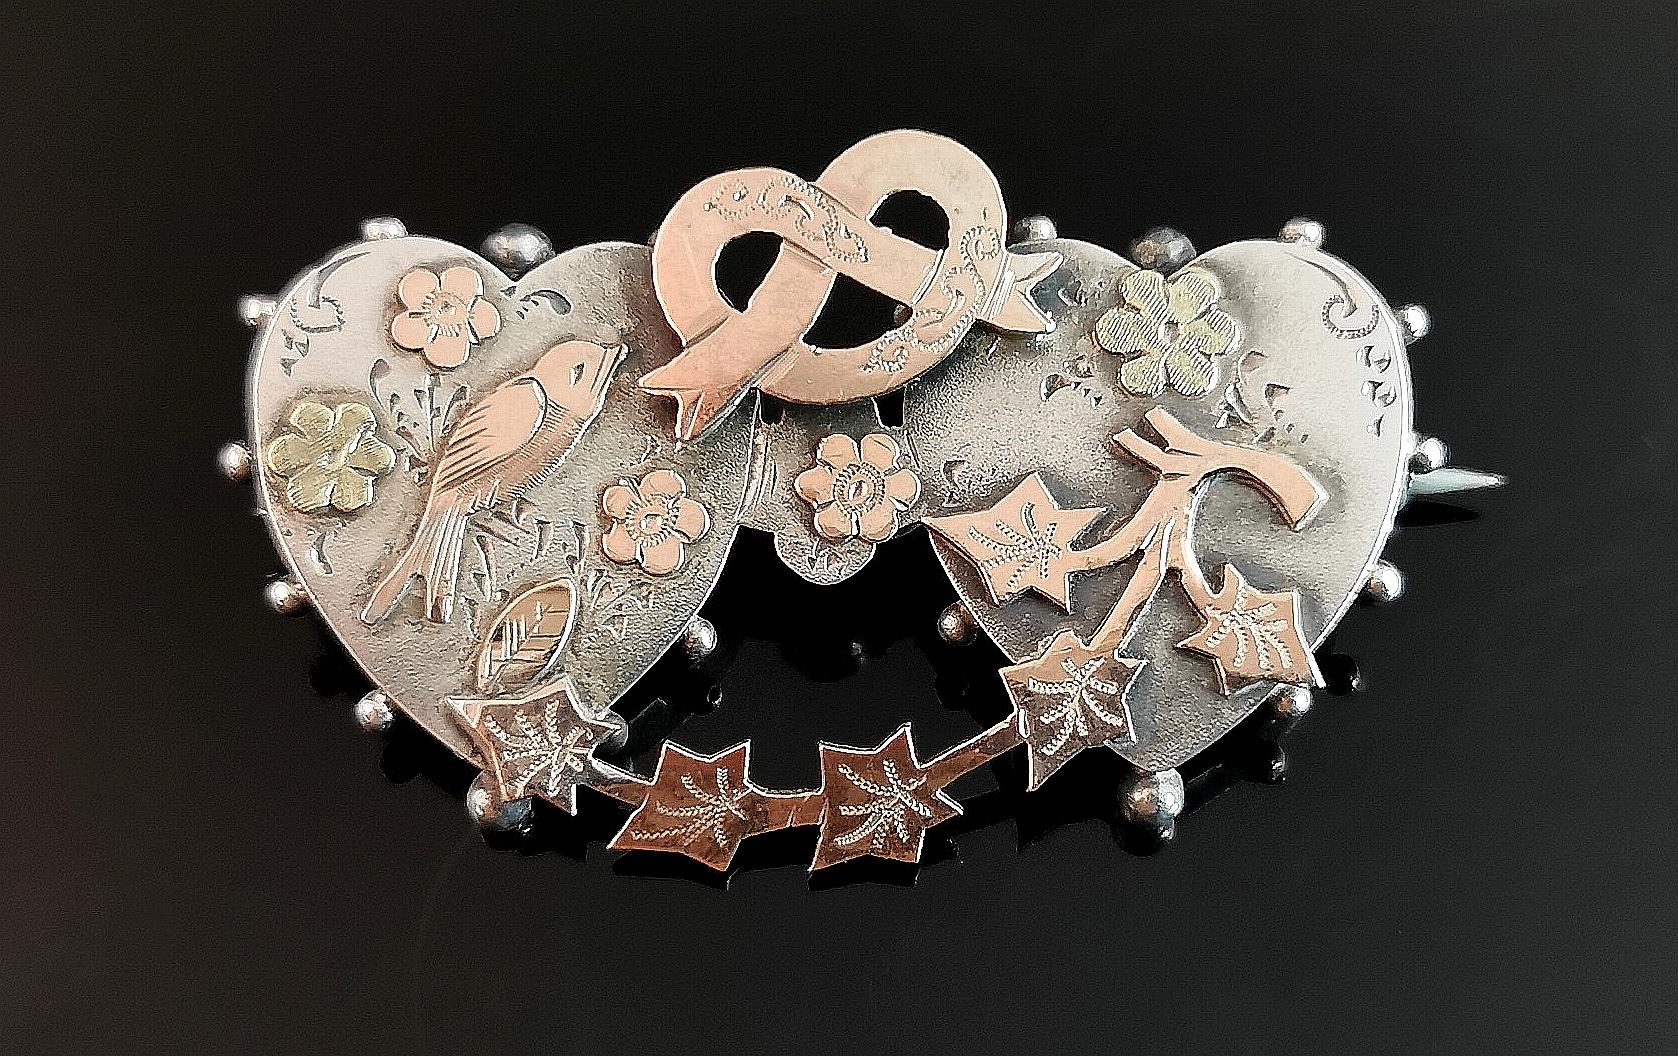 An attractive and unusual antique sweetheart brooch.

This particular sweetheart brooch really does pack in every kind of symbolic message it can.

Crafted in sterling silver, it has applied yellow and Rose gold accents.

The brooch is made up of